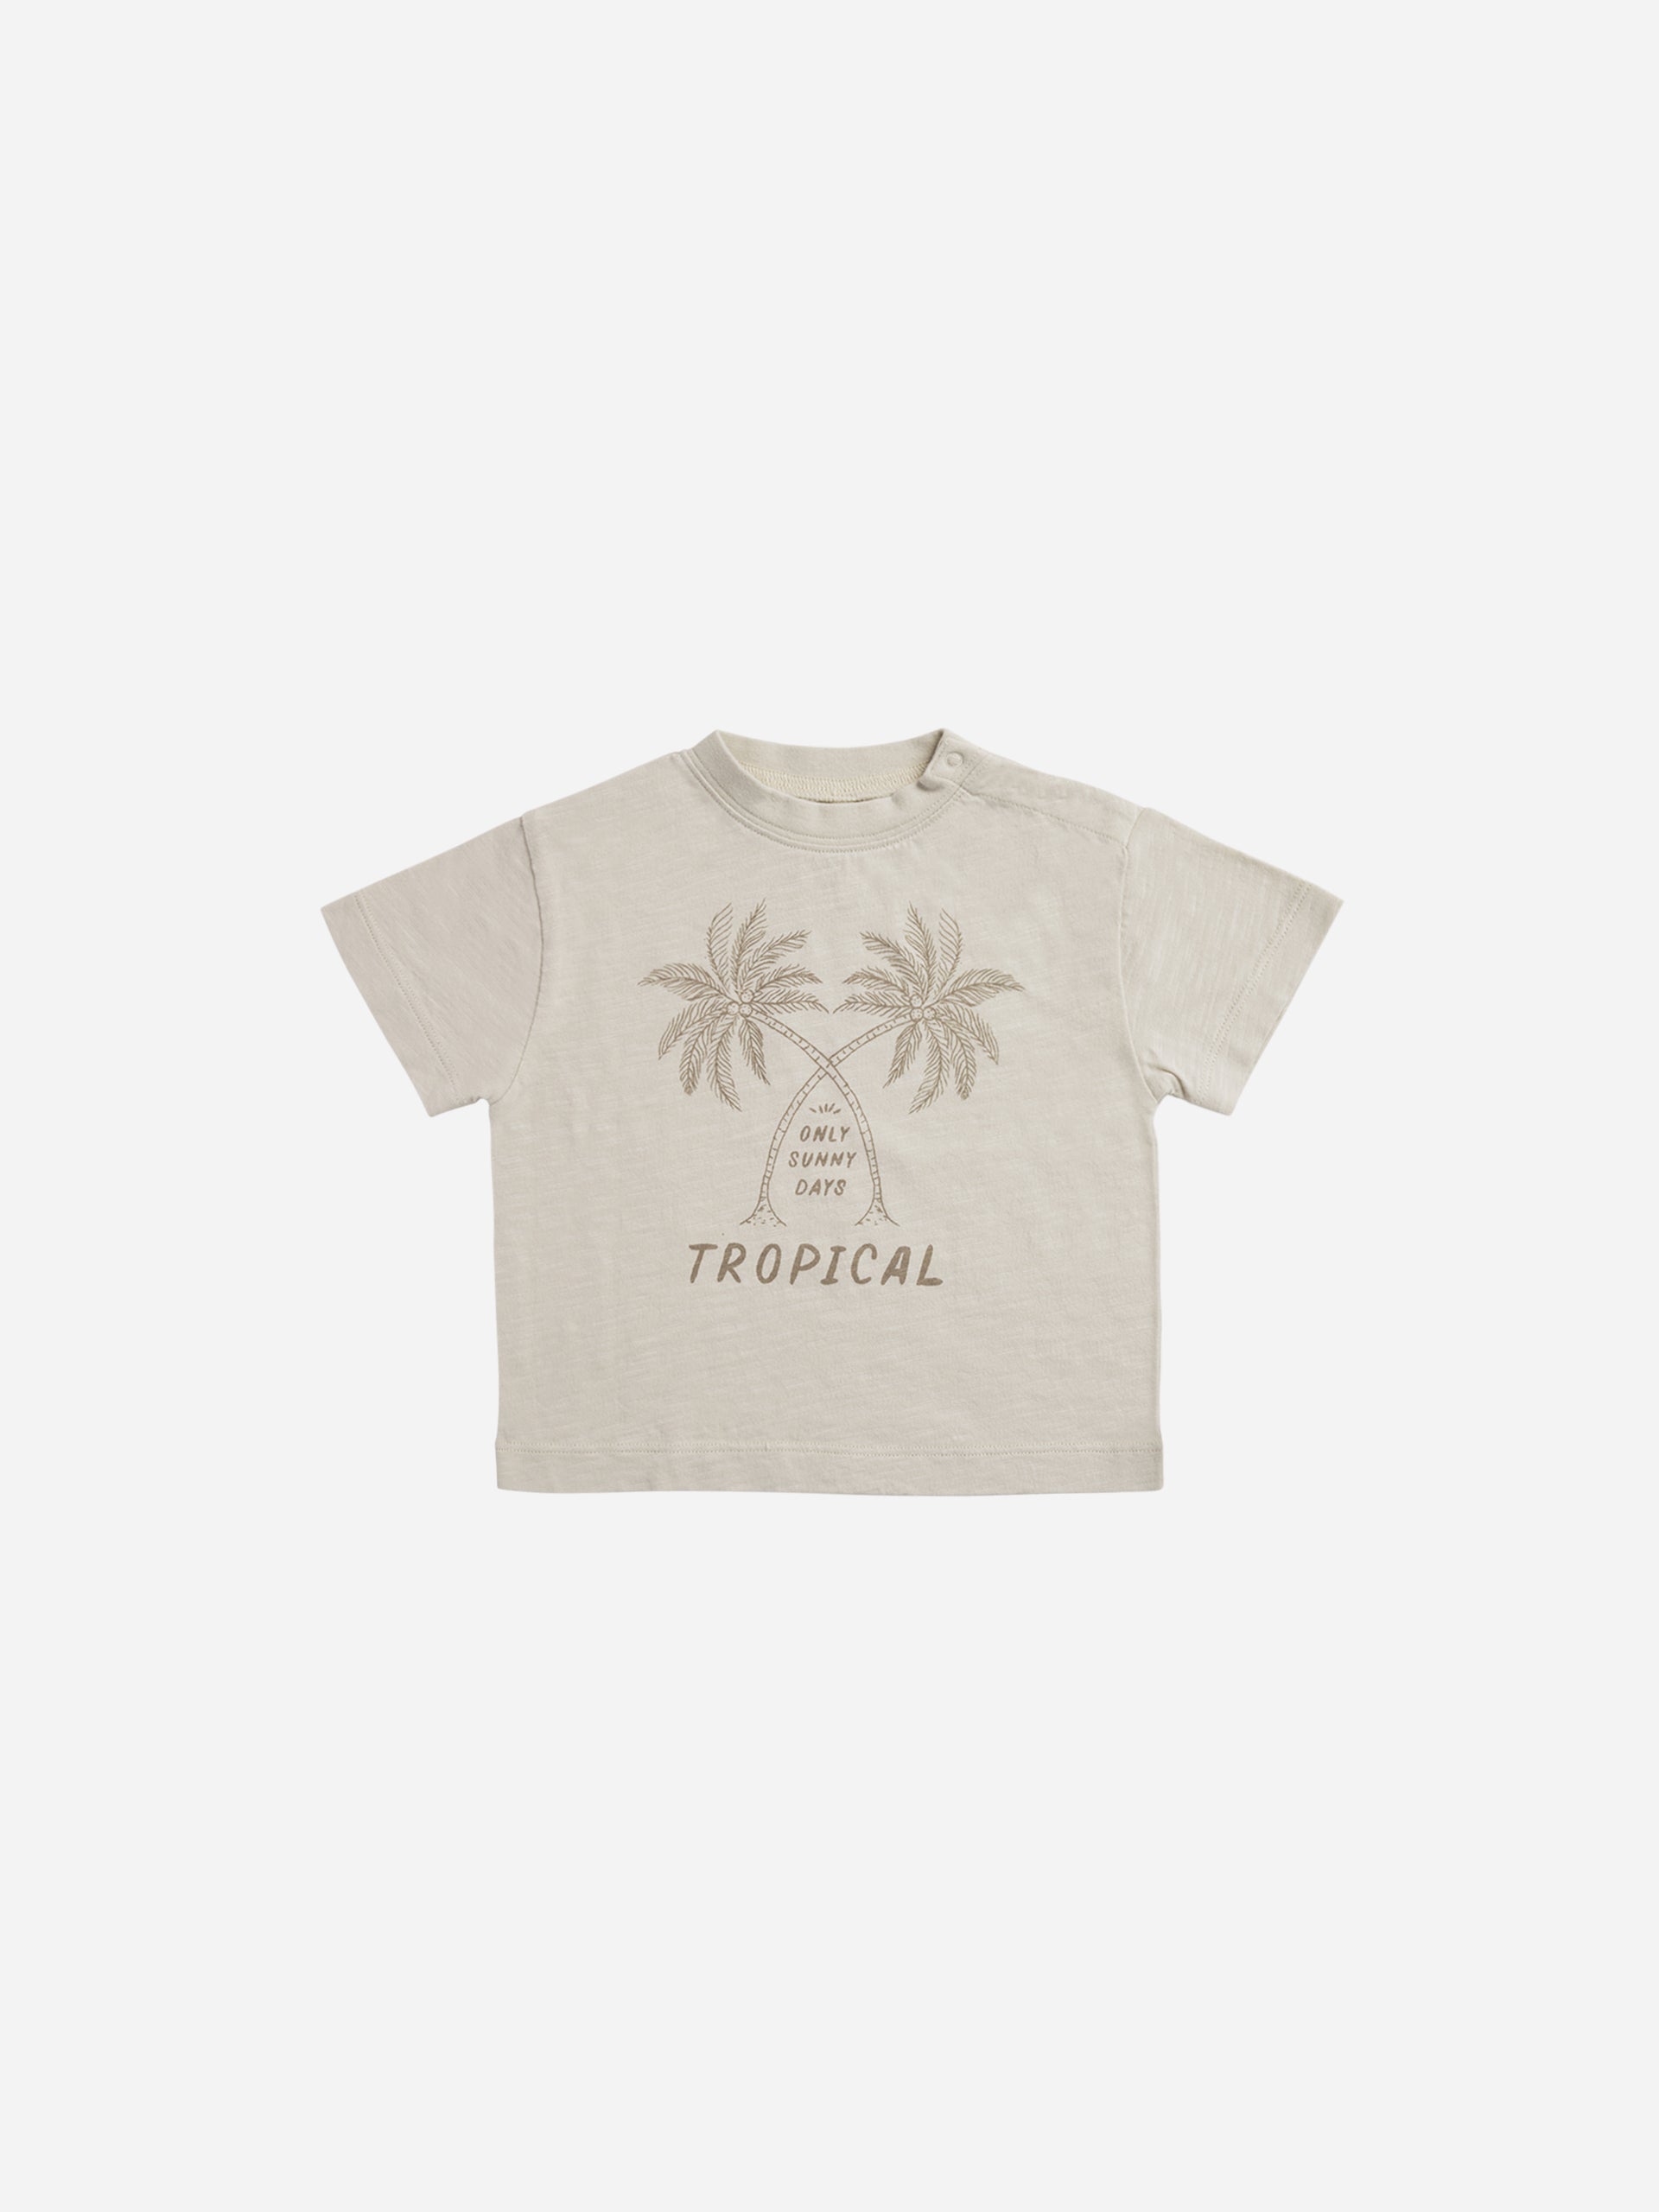 Relaxed Tee || Sunny Days - Rylee + Cru | Kids Clothes | Trendy Baby Clothes | Modern Infant Outfits |